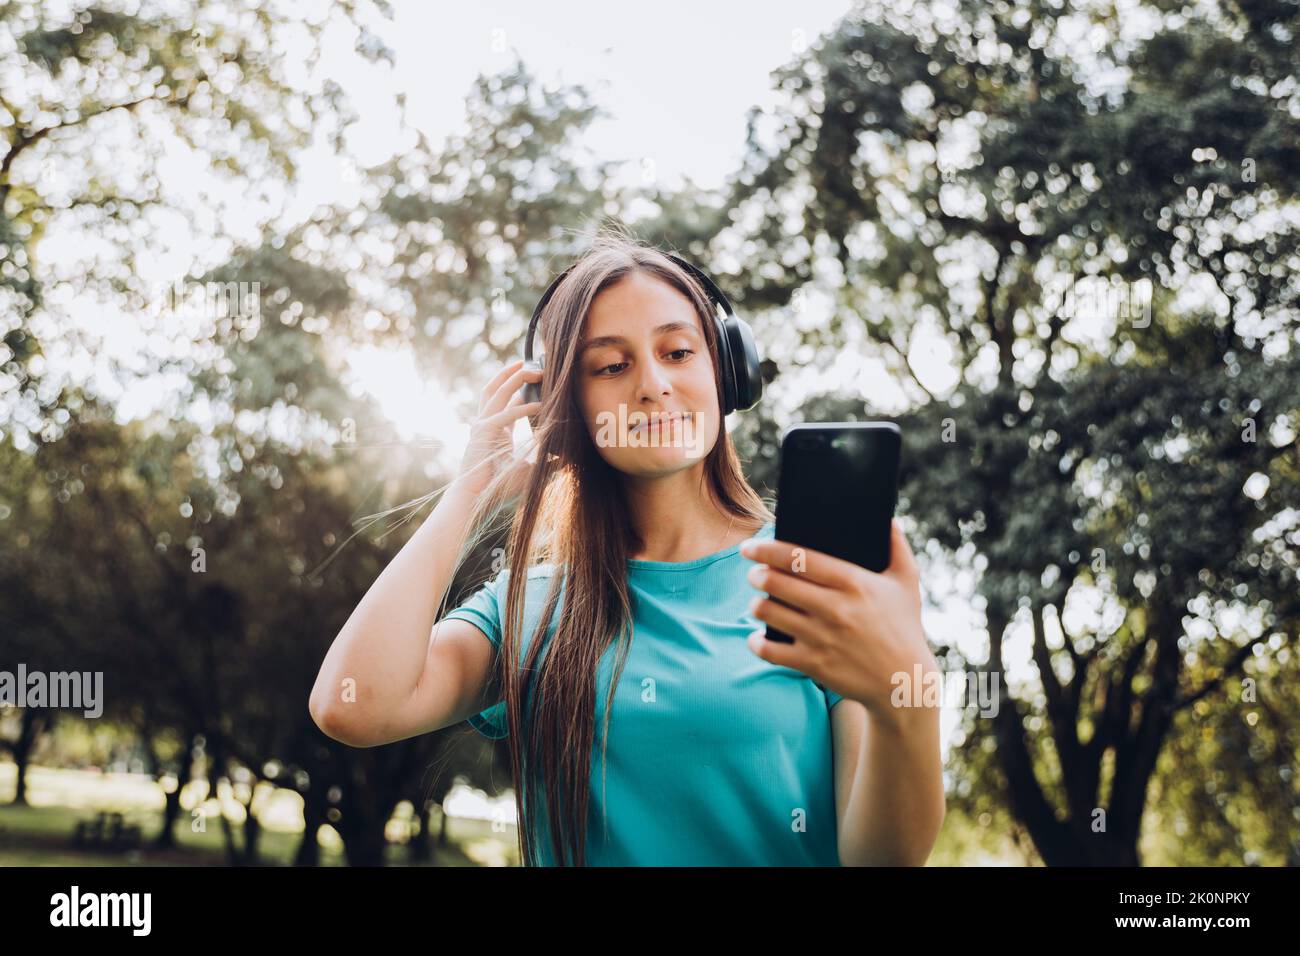 Teenage girl wearing turquoise t shirt, using headphones, setting playlist on her smartphone in the park. Sun backlight Stock Photo